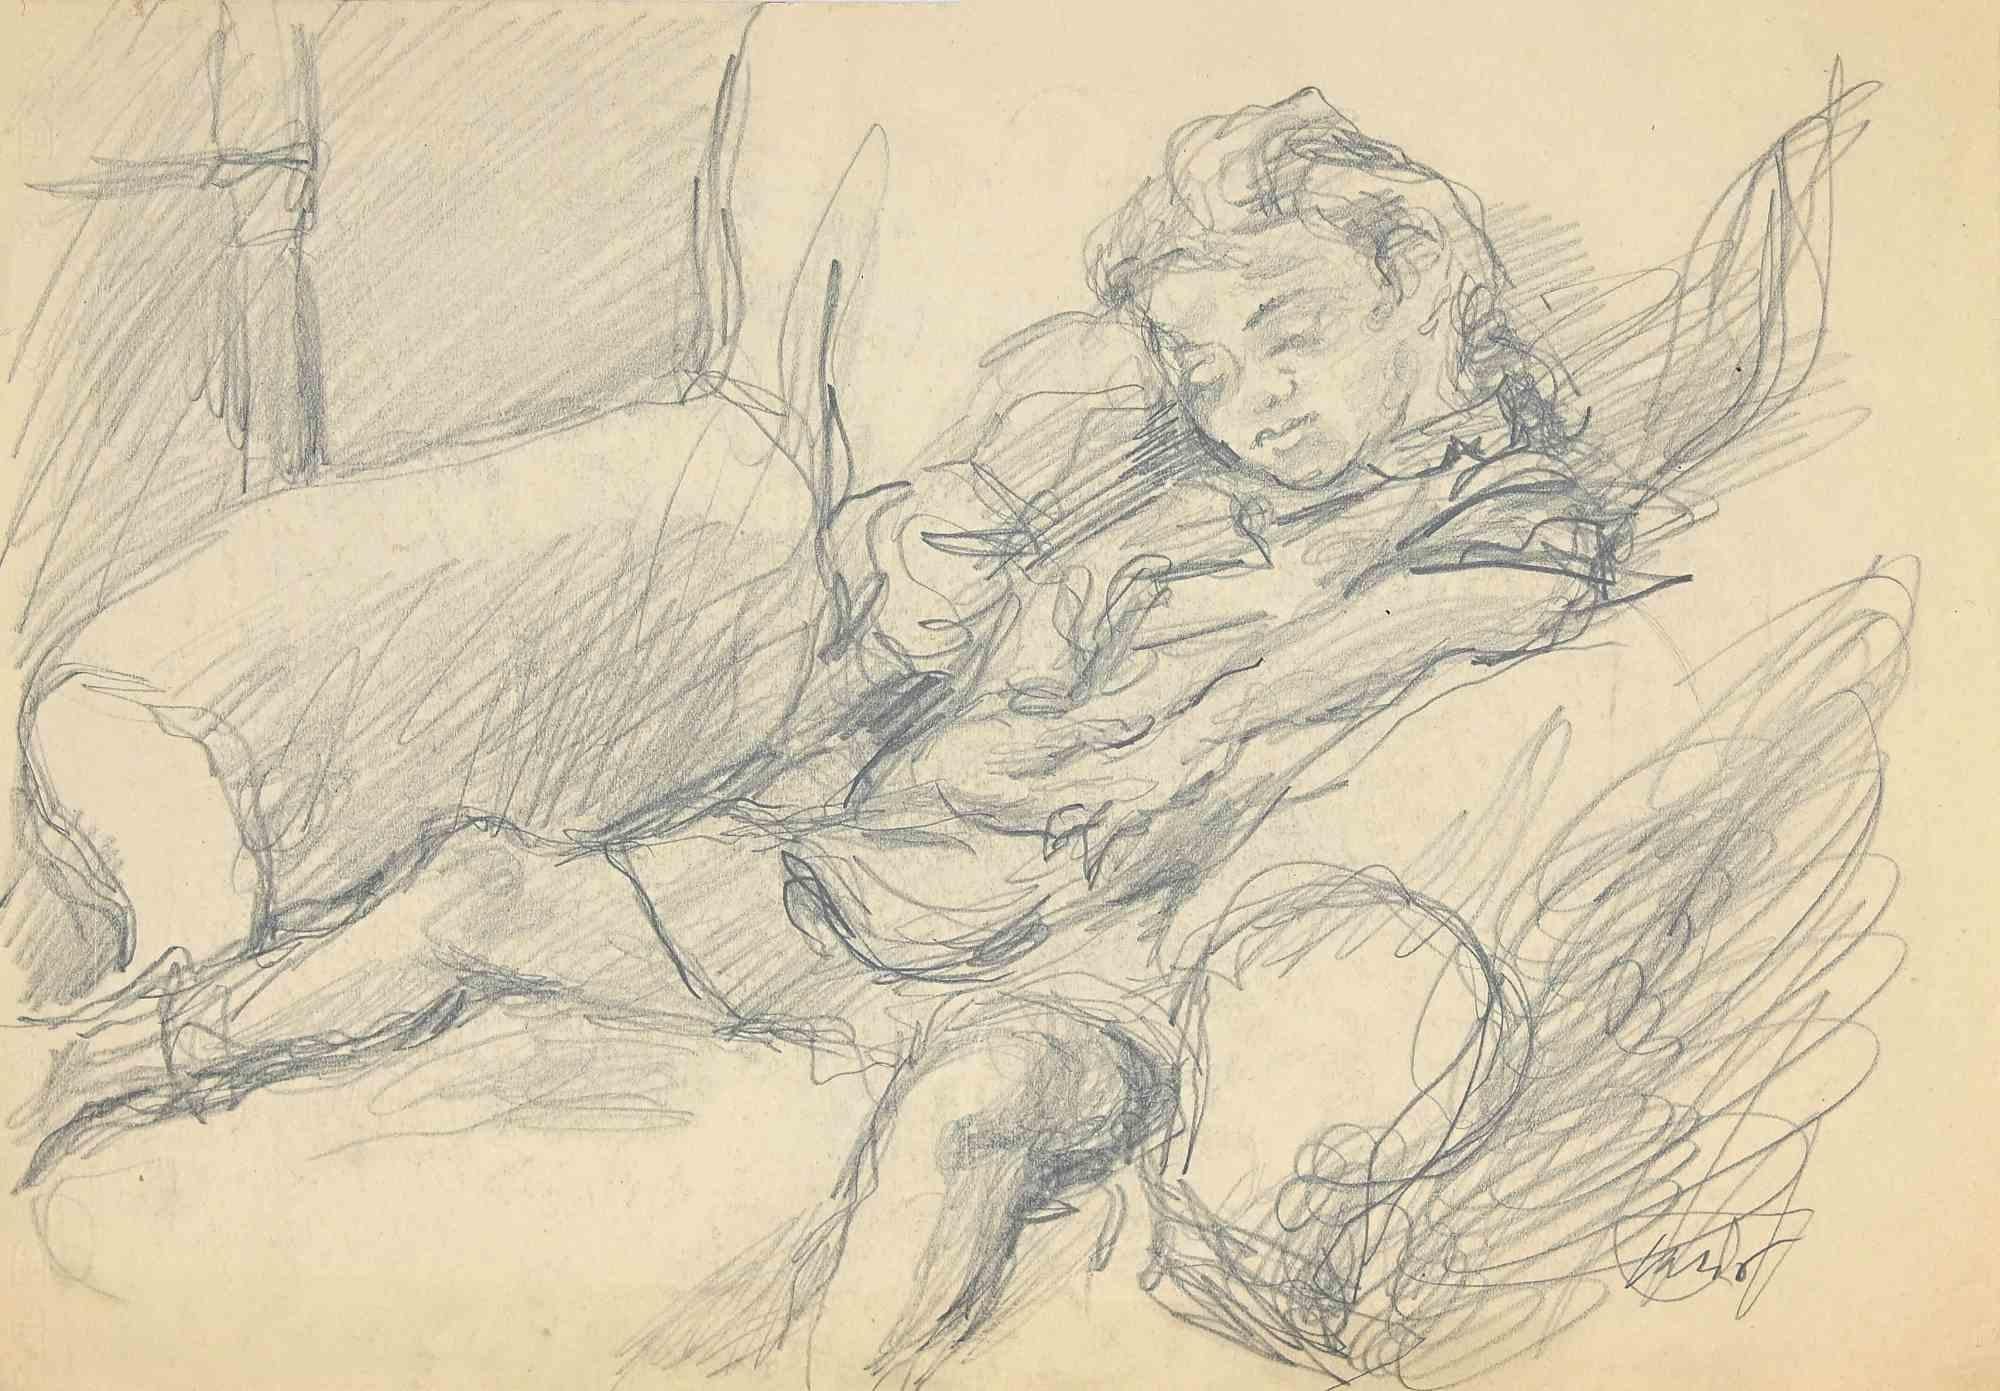 Girl is an original Pencil Drawing and Watercolor realized by Mino Maccari in mid-20th Century.

Good condition on a yellowed paper.

Hand-signed by the artist with pencil.

Mino Maccari (1898-1989) was an Italian writer, painter, engraver and